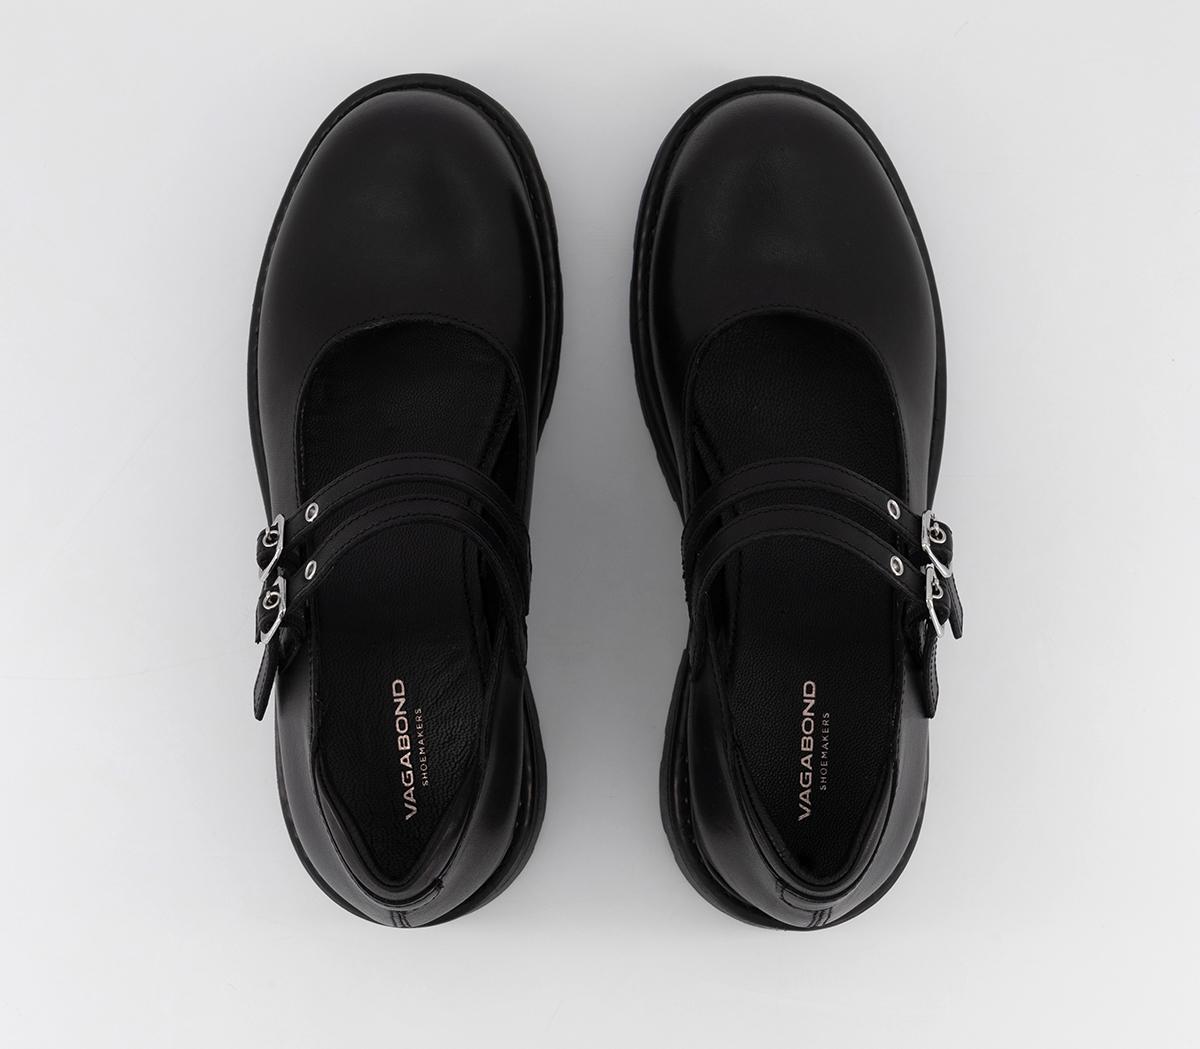 Vagabond Shoemakers Cosmo 2.0 Mary Jane Shoes Black Mary Jane Shoes